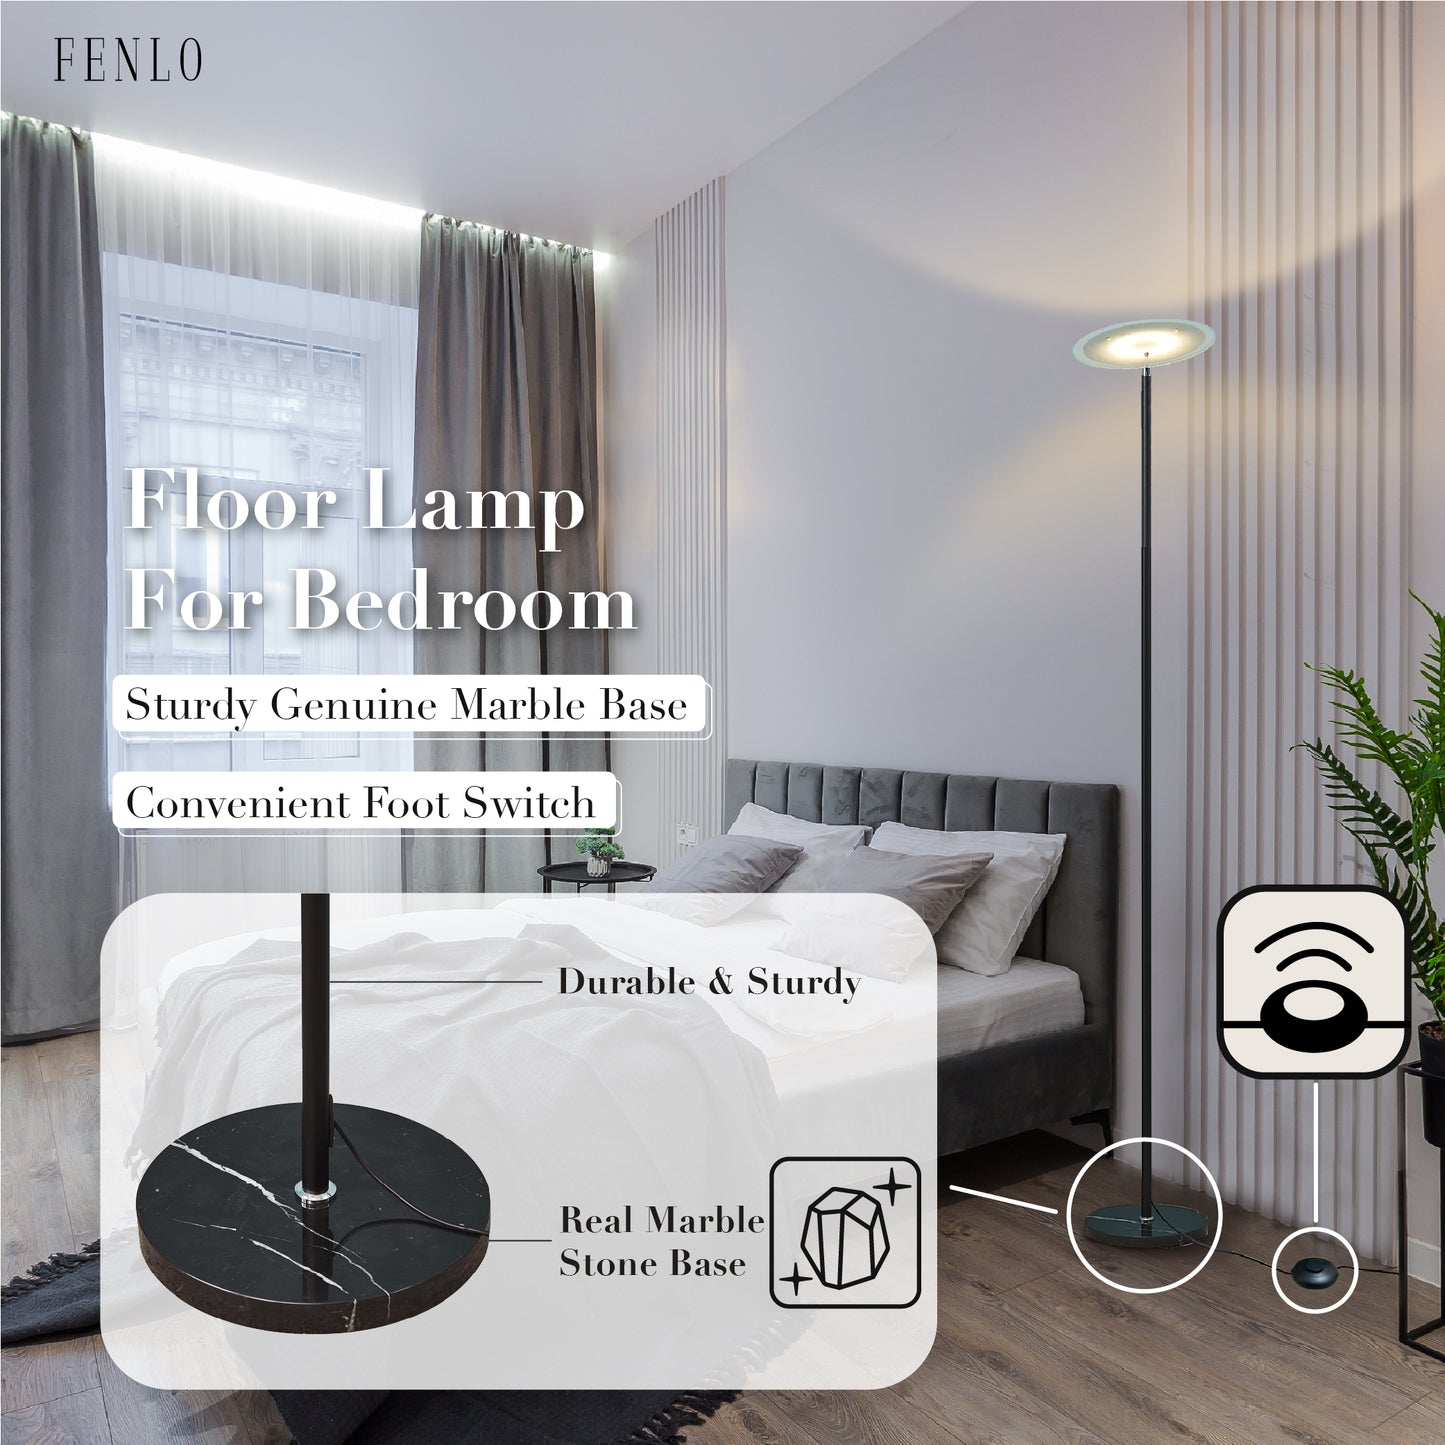 FENLO Falon Dimmable Torchiere Floor Lamp With Black Marble Base